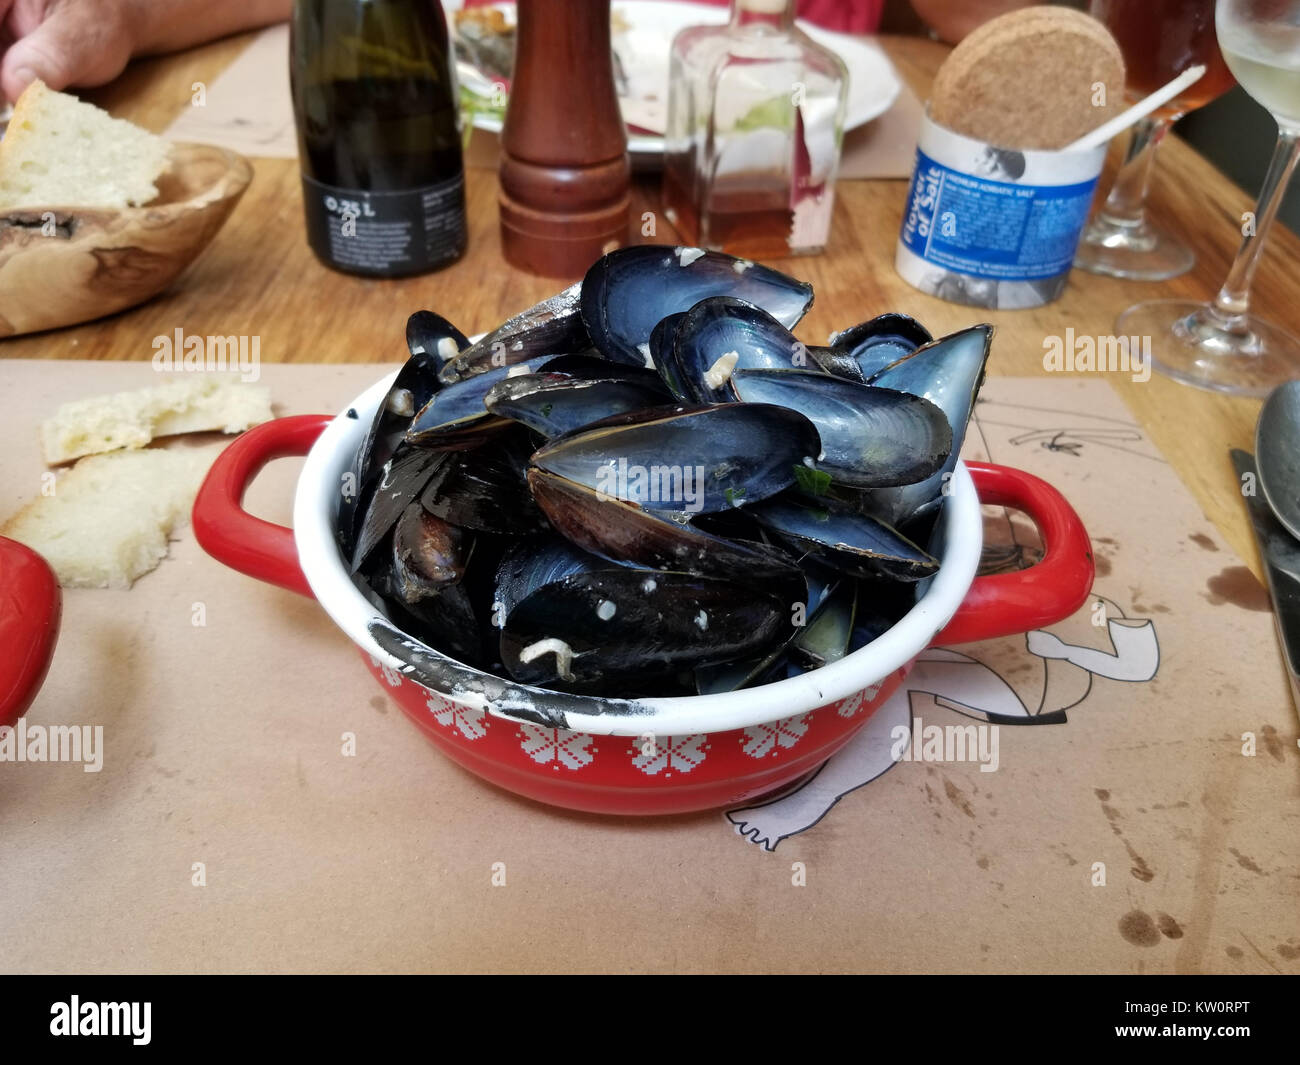 Black mussels steamed with pasta ready to eat and eaten Stock Photo